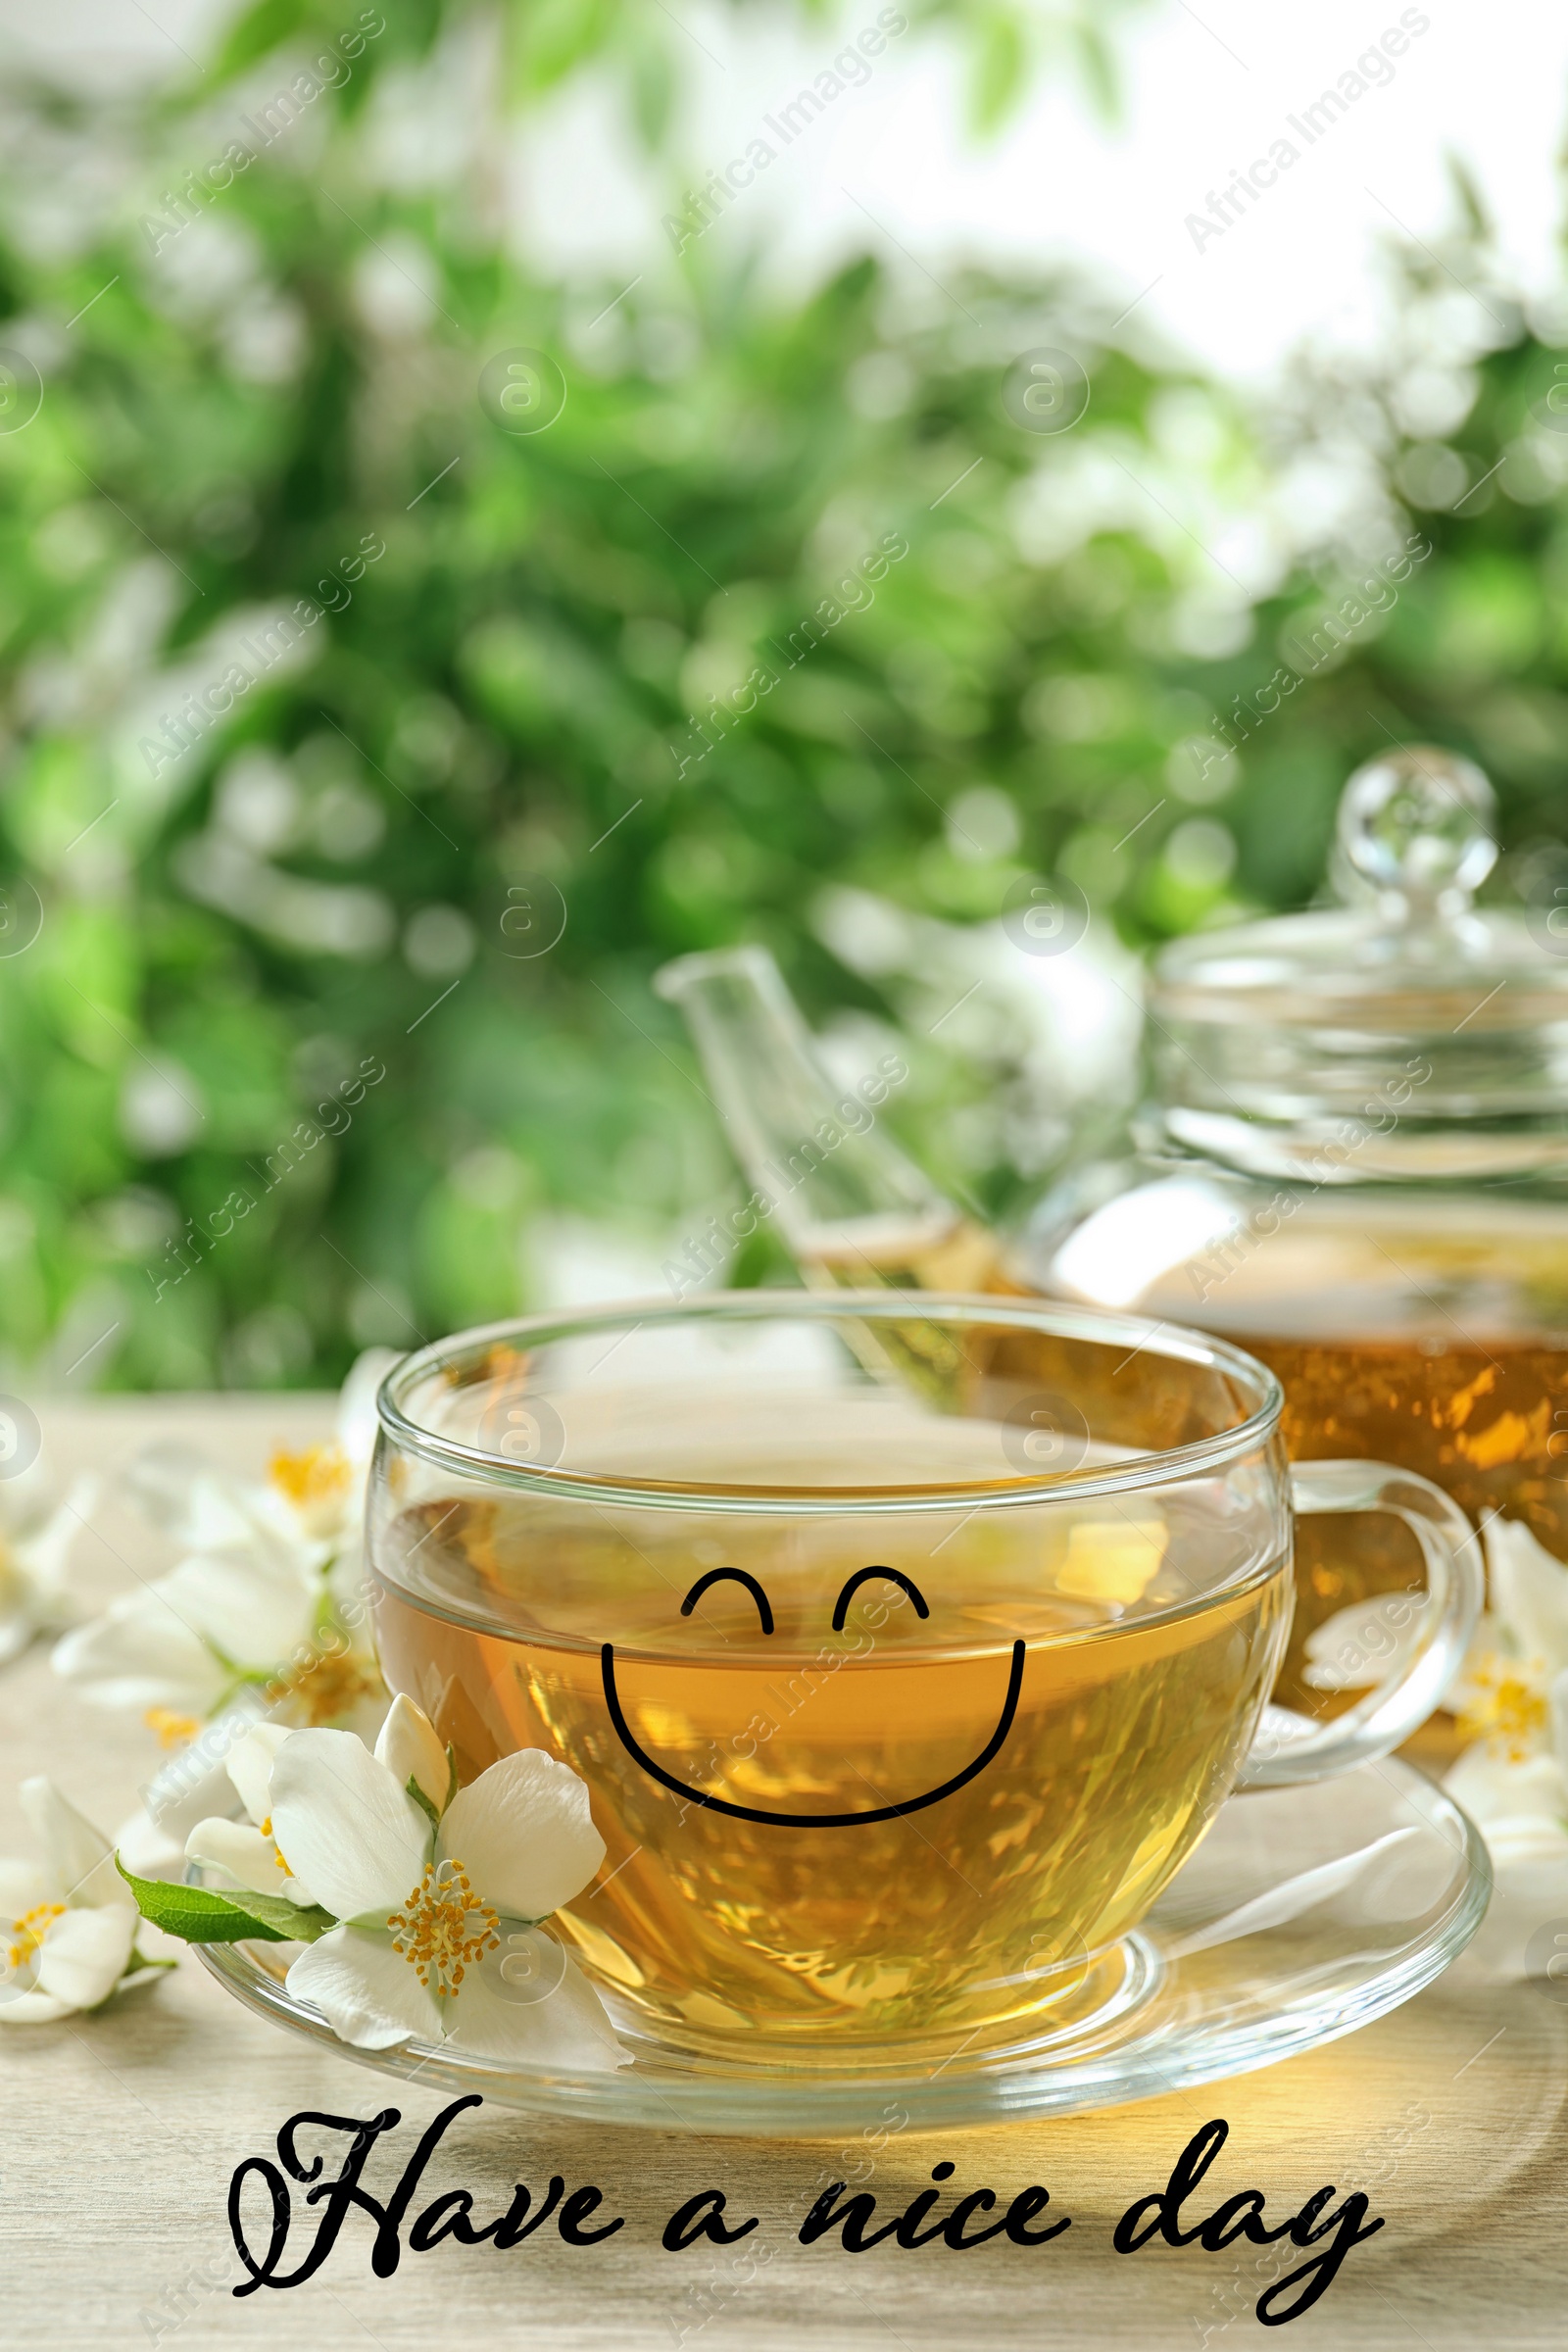 Image of Text Have a nice day, glass cup of aromatic jasmine tea and fresh flowers on wooden table